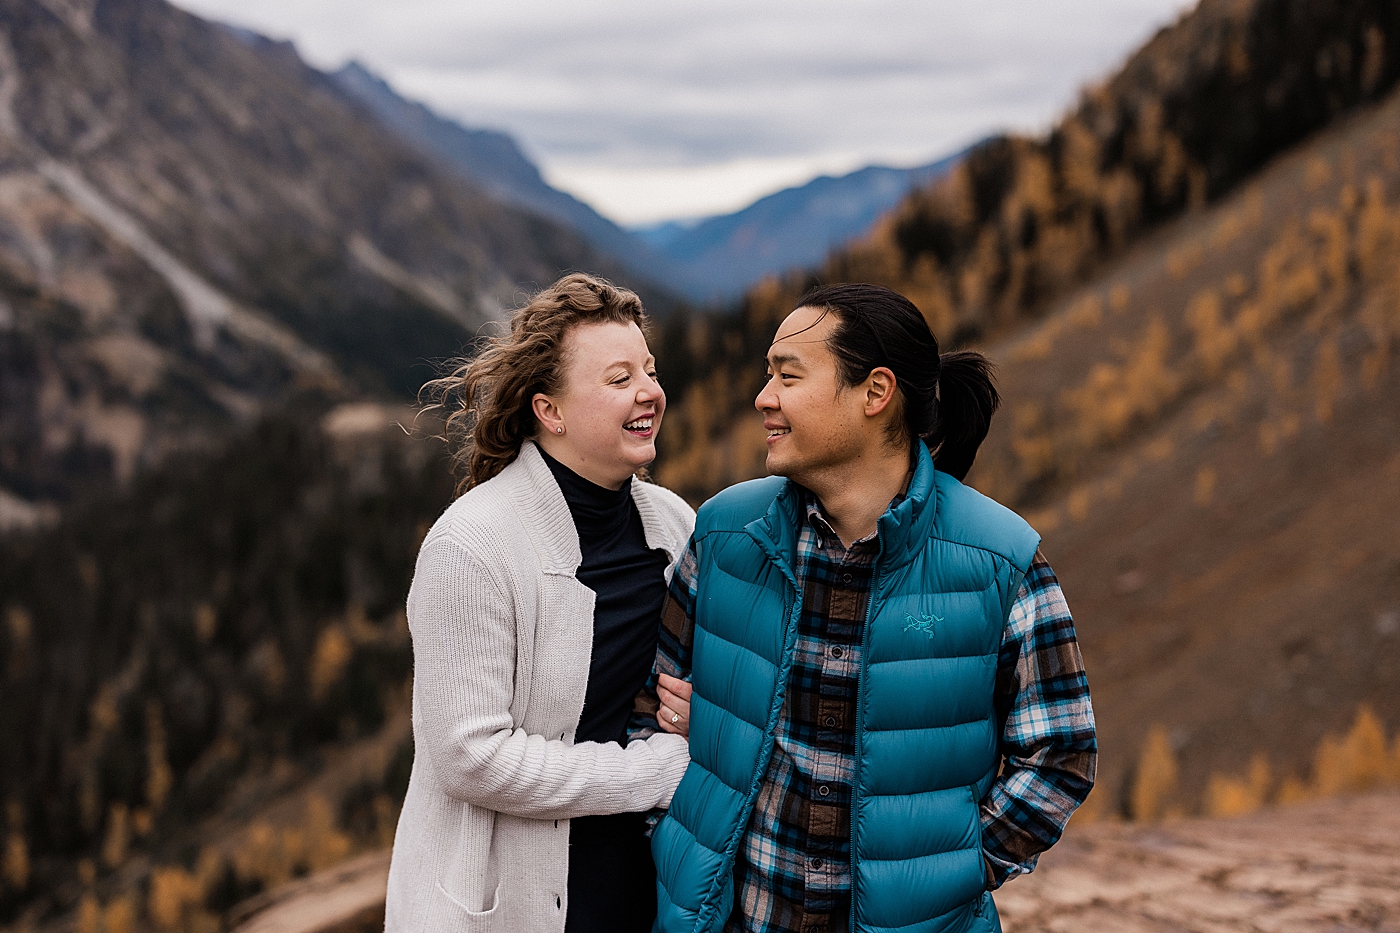 Larches engagement session in Leavenworth with Megan Montalvo Photography.